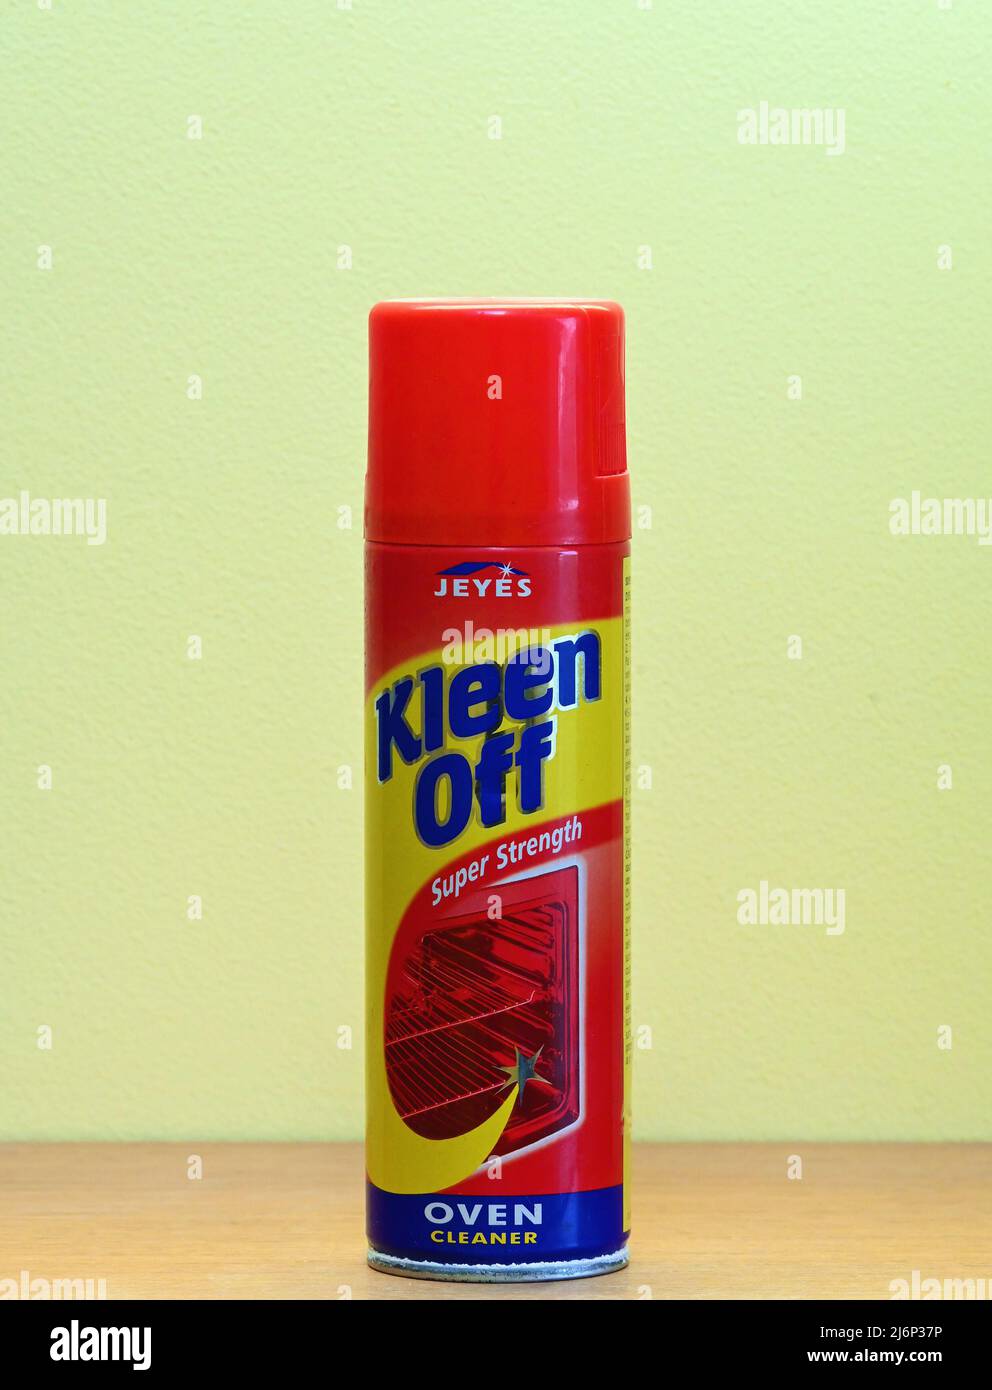 Jeyes Kleen Off Super Strength Oven Cleaner. Spray can. Stock Photo